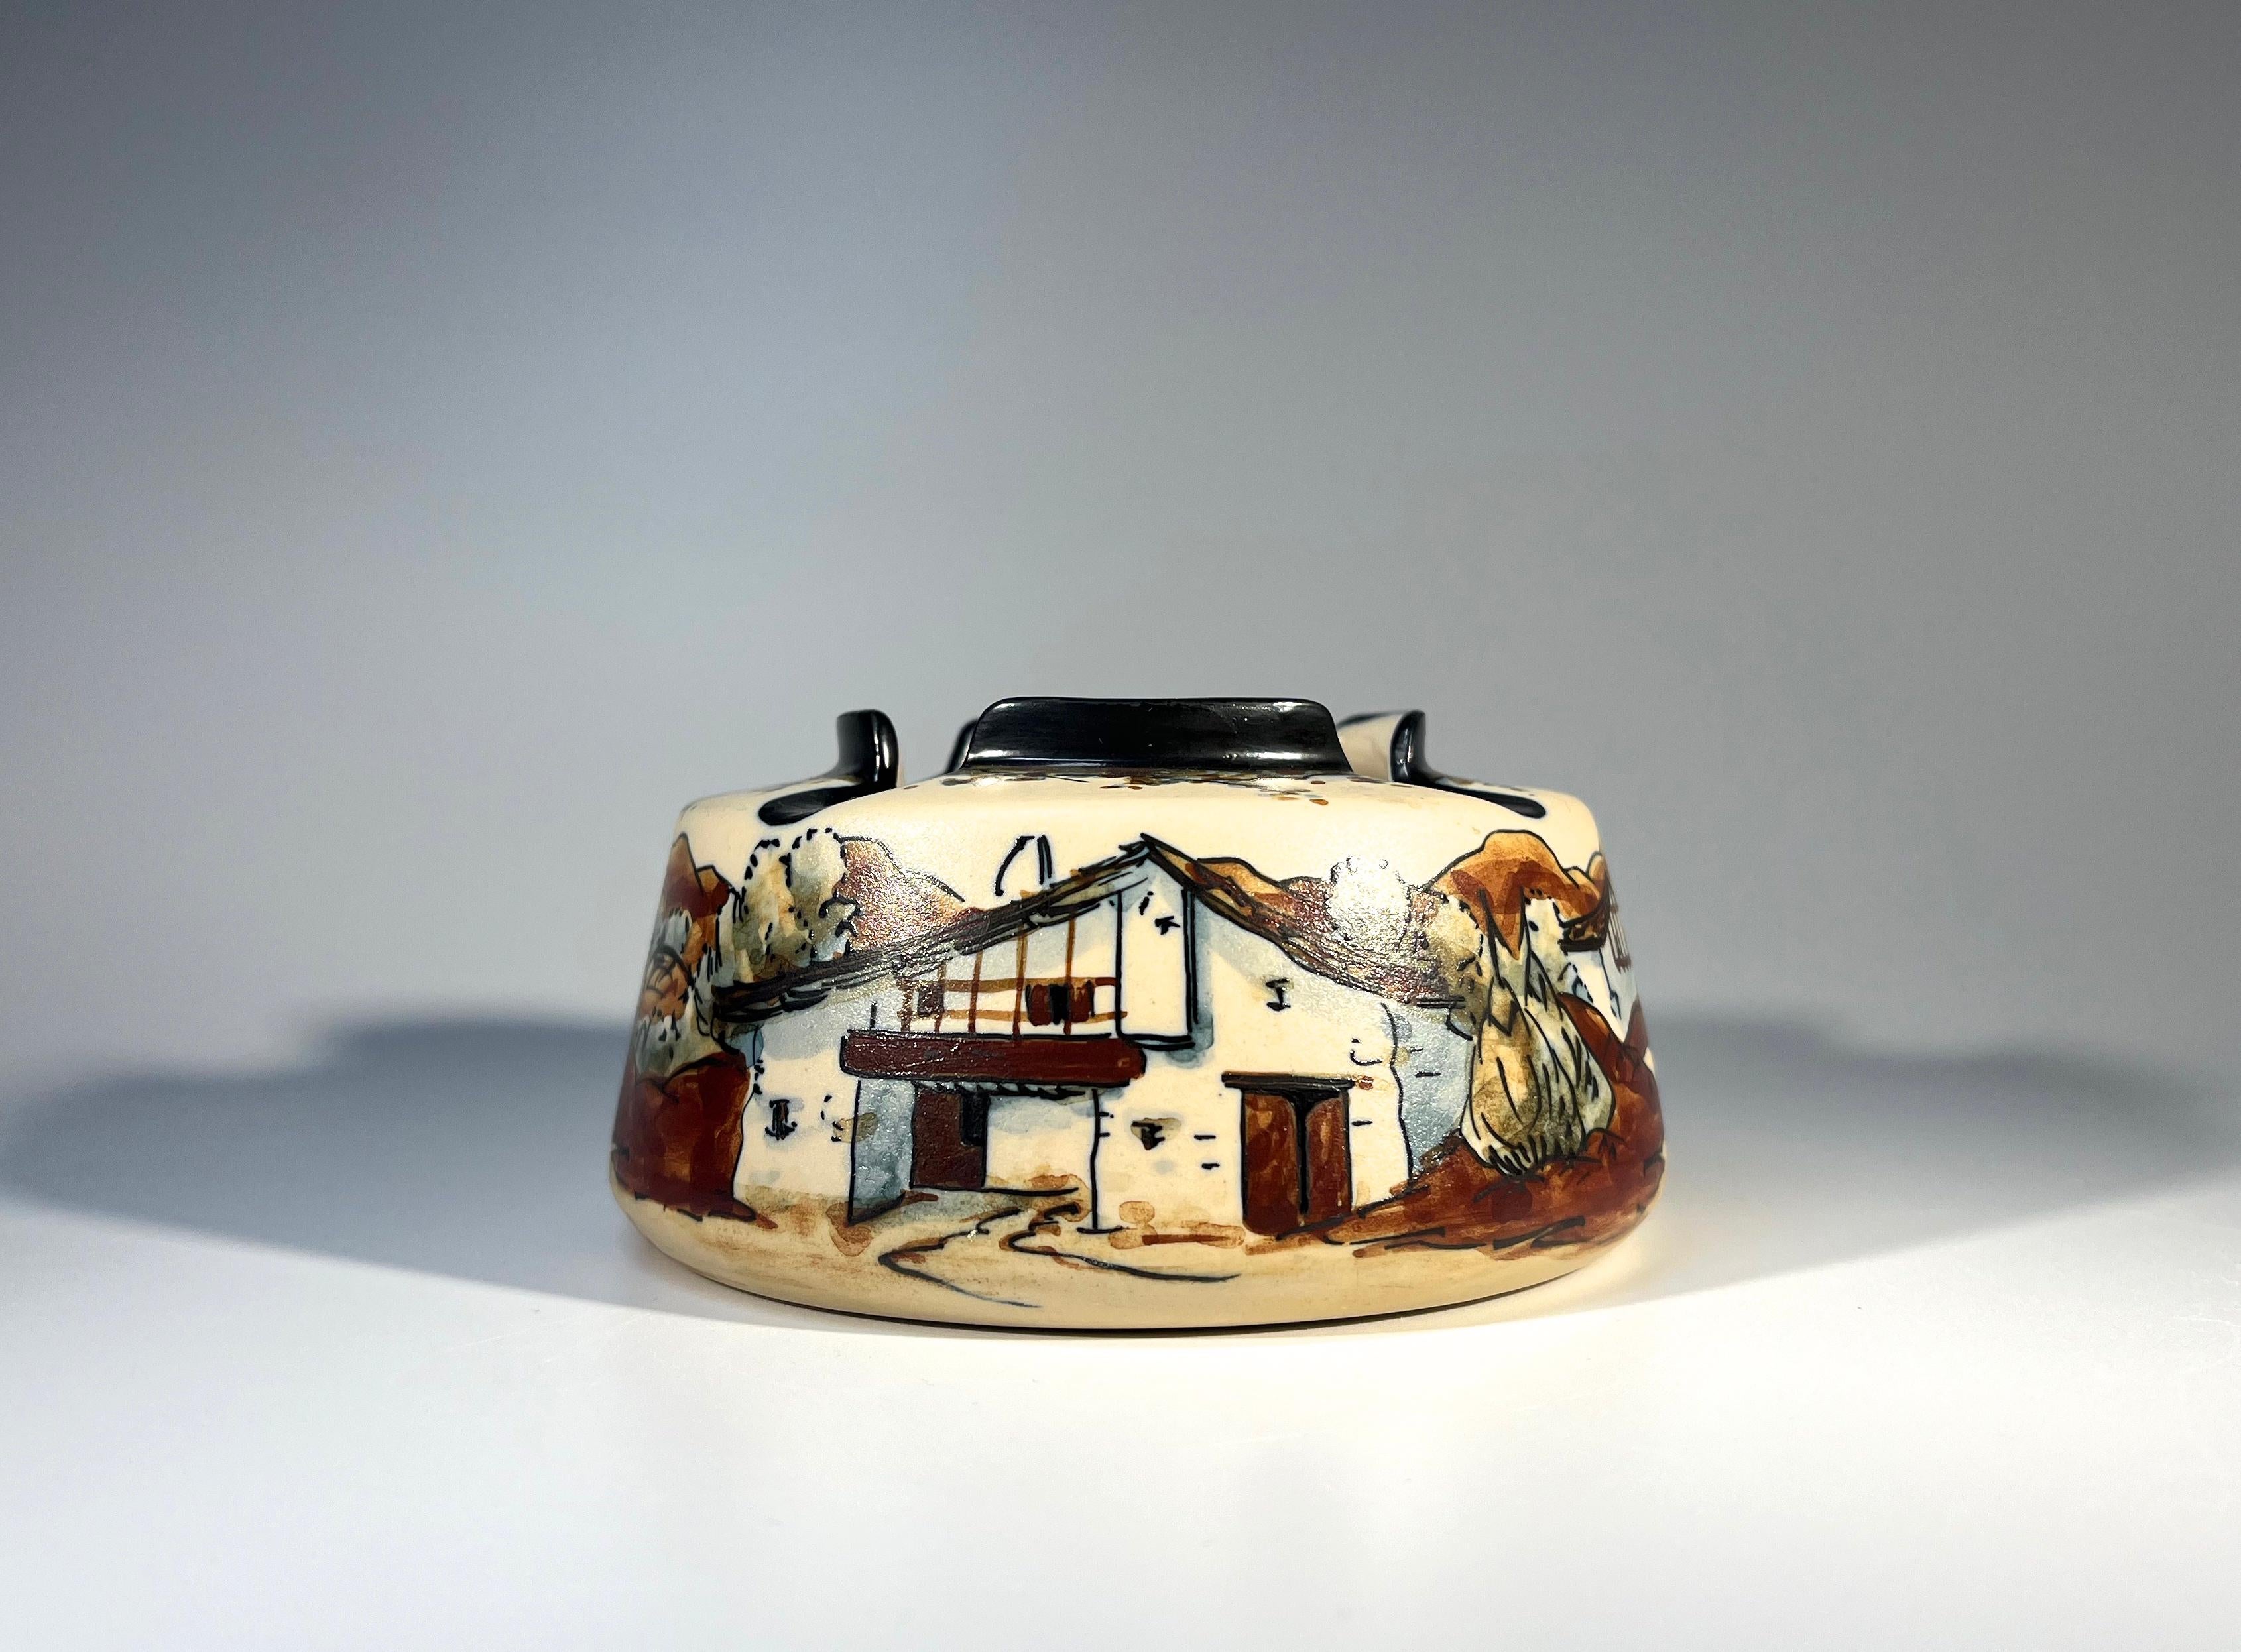 Peaceful pastoral Basque scene illustrated by Monique Ordoqui for Ciboure, France 
Stoneware ashtray hand decorated by the creative Basque artist
Circa 1969-1974
Signed M Ordoqui. R F Ciboure
Height 2.5 inch, Diameter 4.75 inch
In excellent